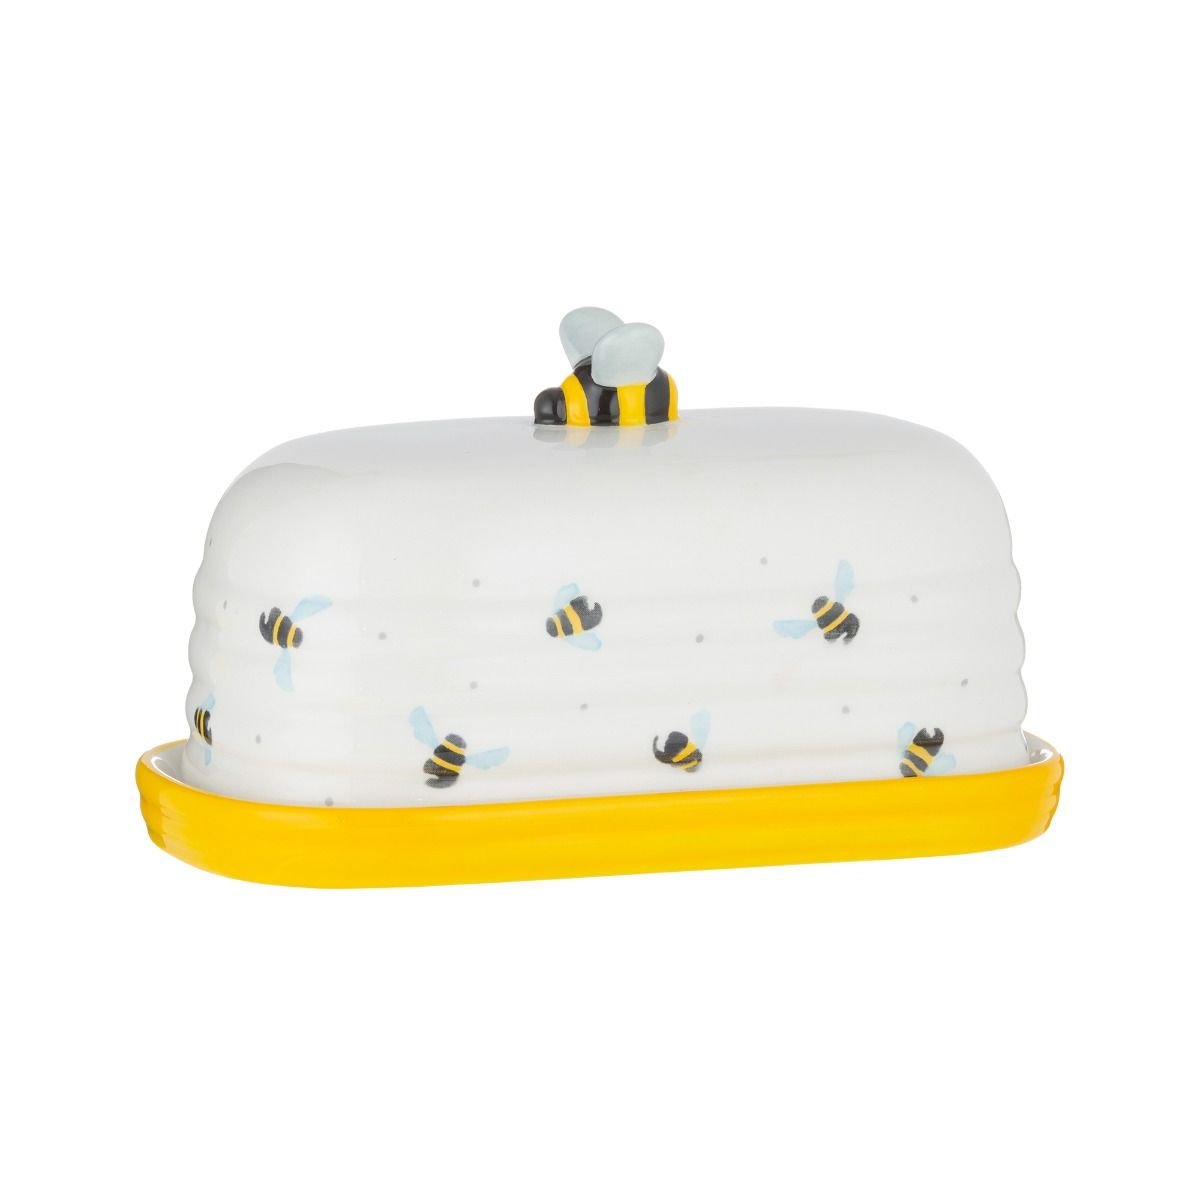 Bumble Bee Collection of Kitchen Items Butter Dish, Creamer, Sugar